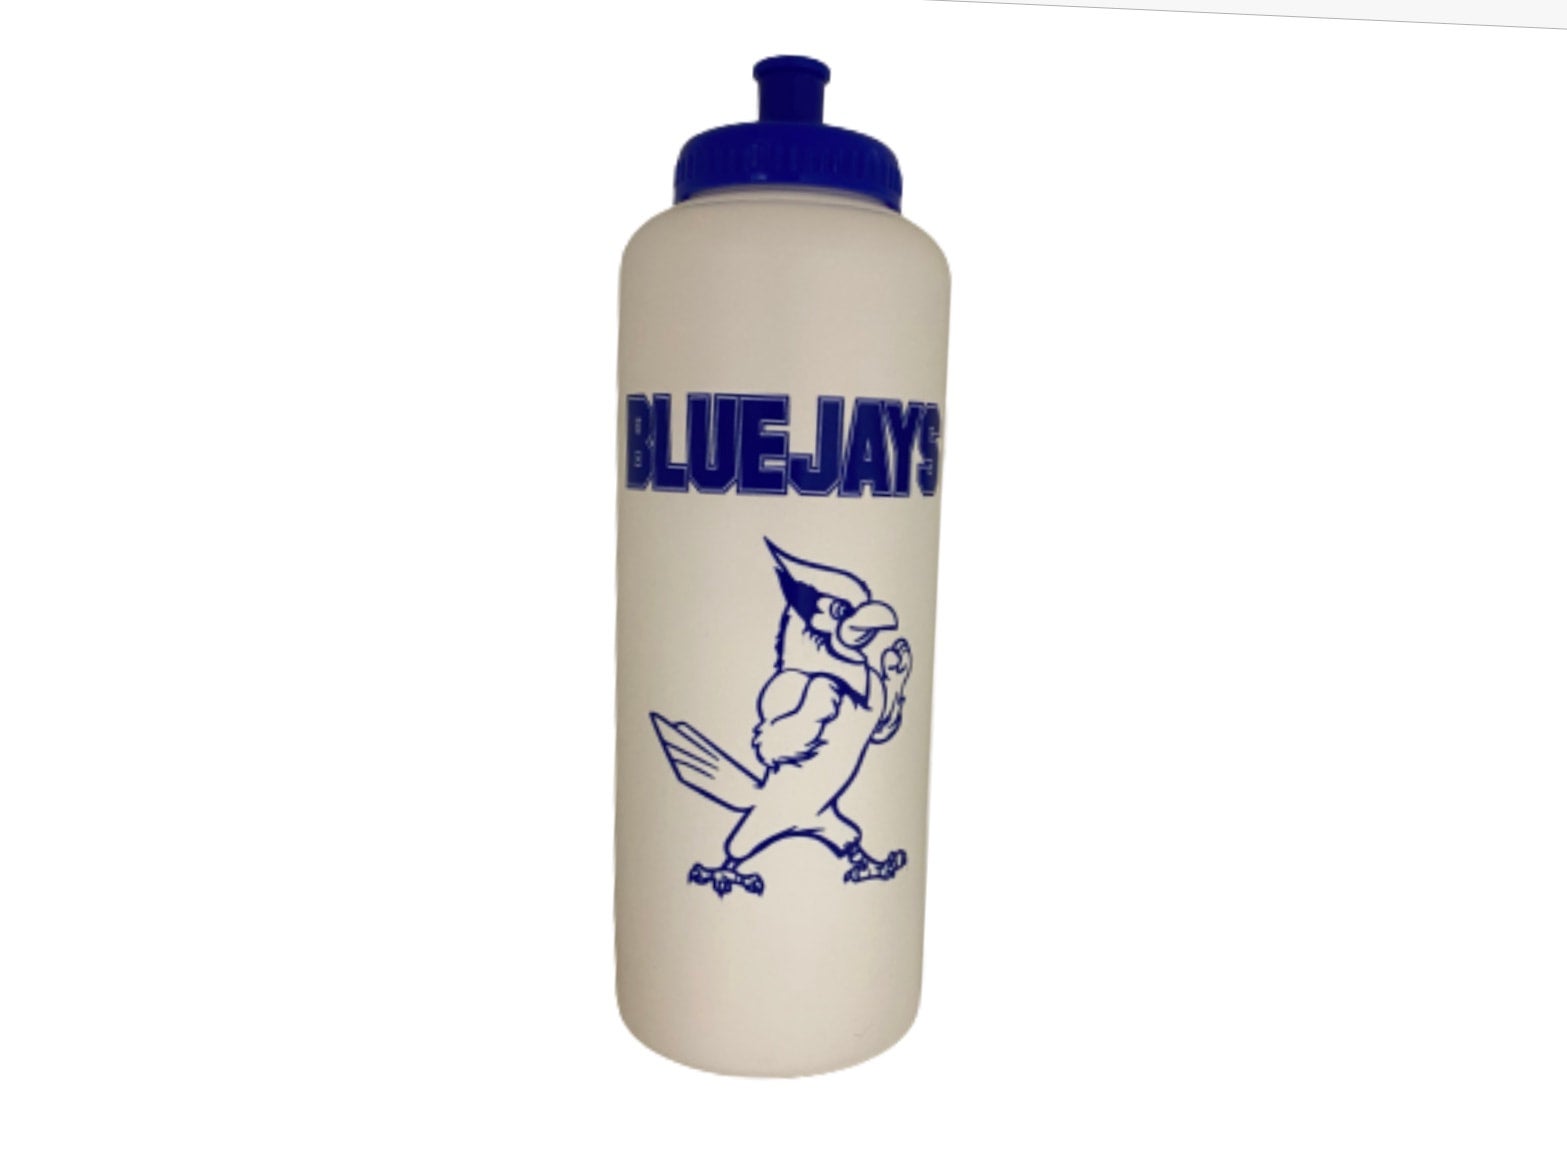 Central Columbia High School Fighting Blue Jays Apparel Store